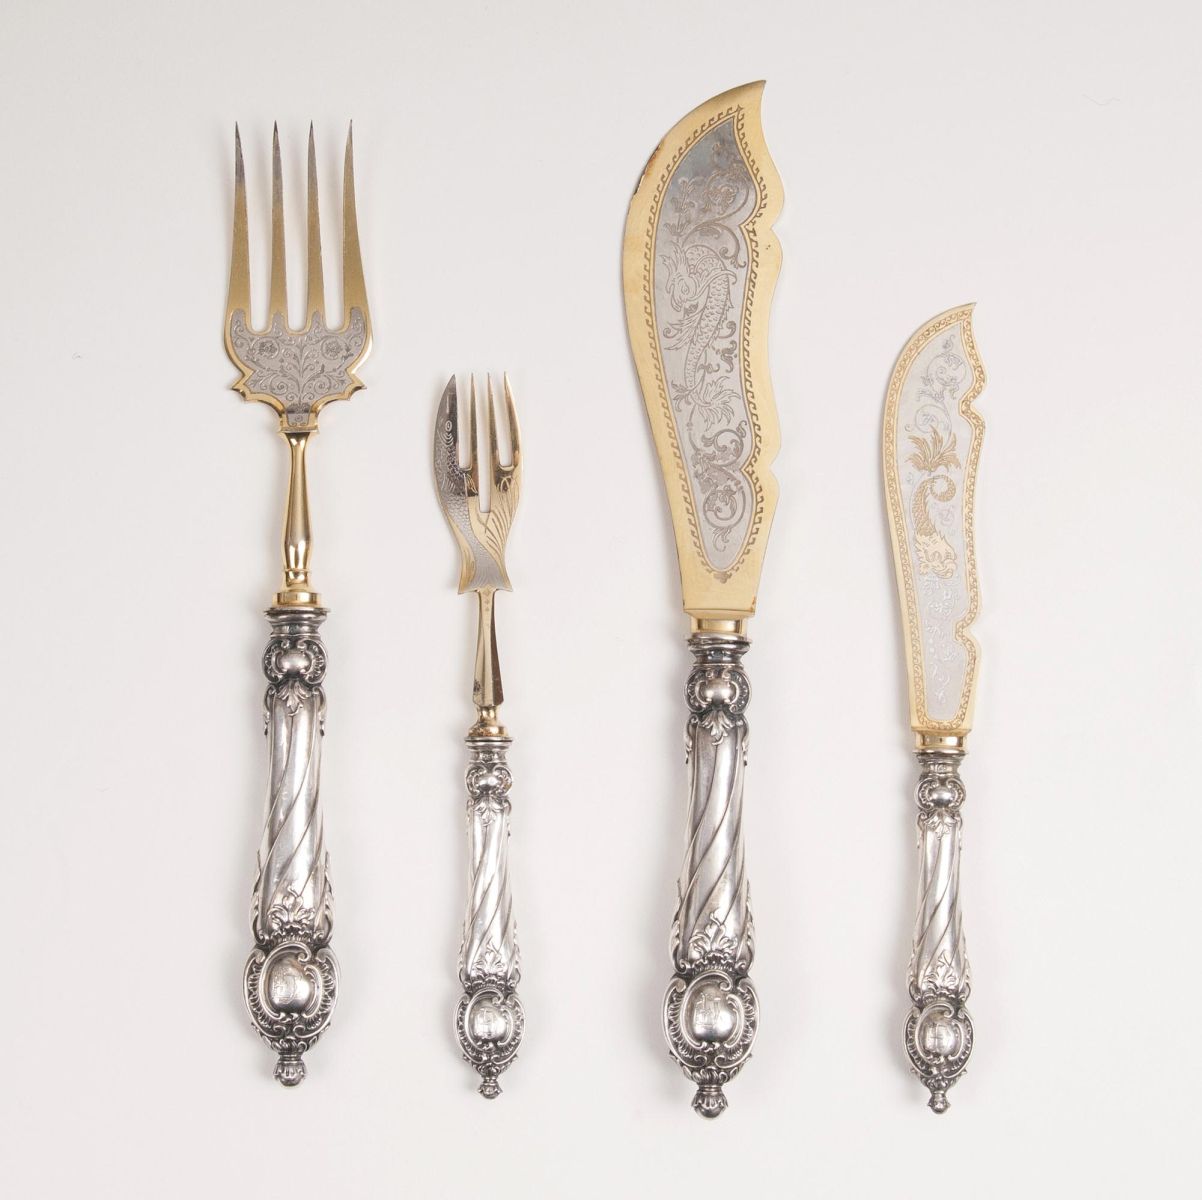 A Fish Cutlery with Fish-Decor for 10 Persons